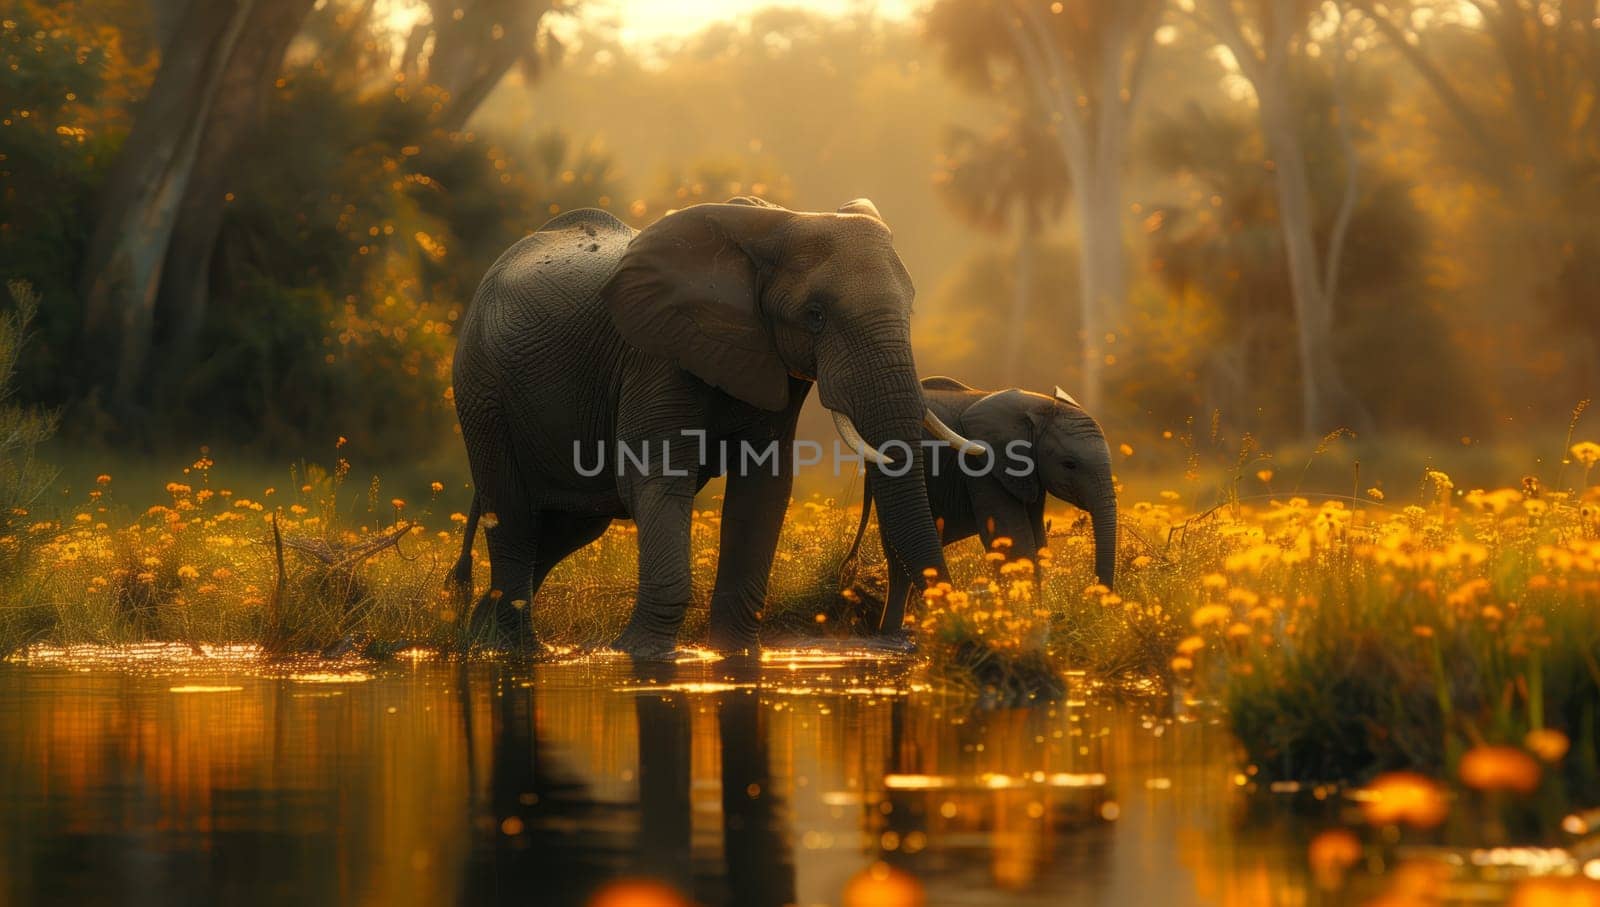 Two Indian elephants are quenching their thirst by drinking water from a river in their natural ecoregion. These majestic animals are important organisms in the natural landscape as working animals